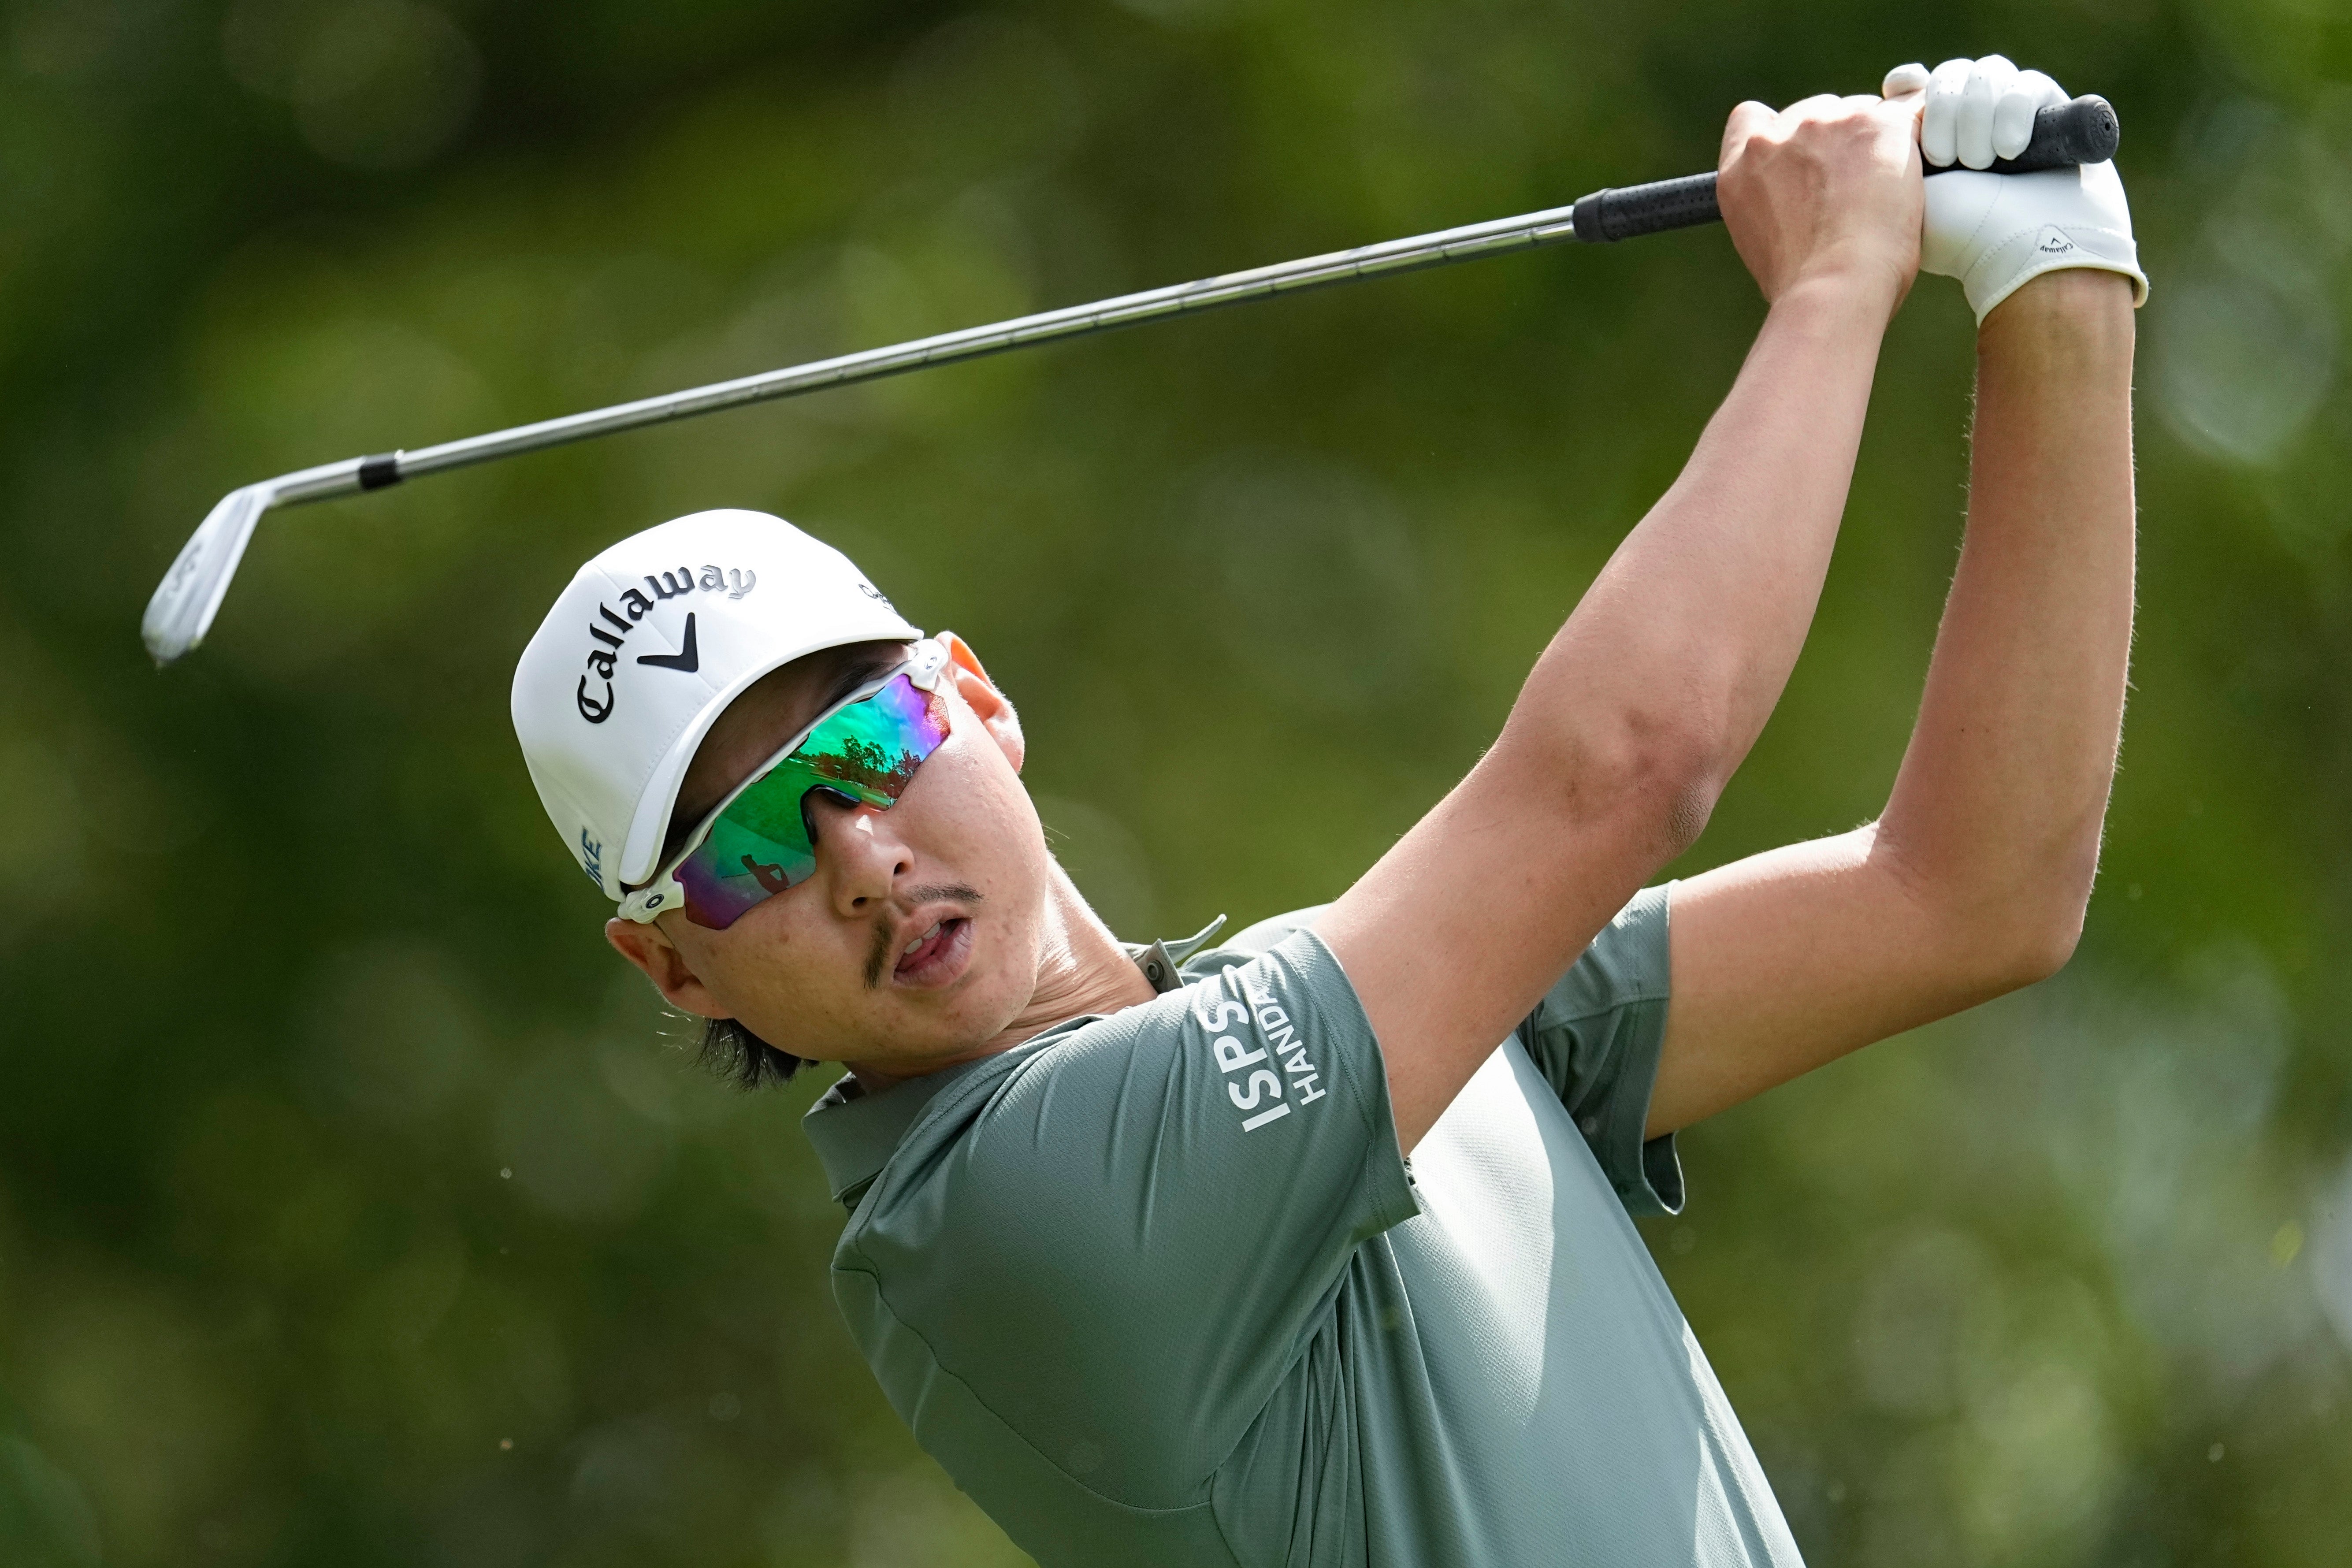 Min Woo Lee on Par 3 day at the Masters